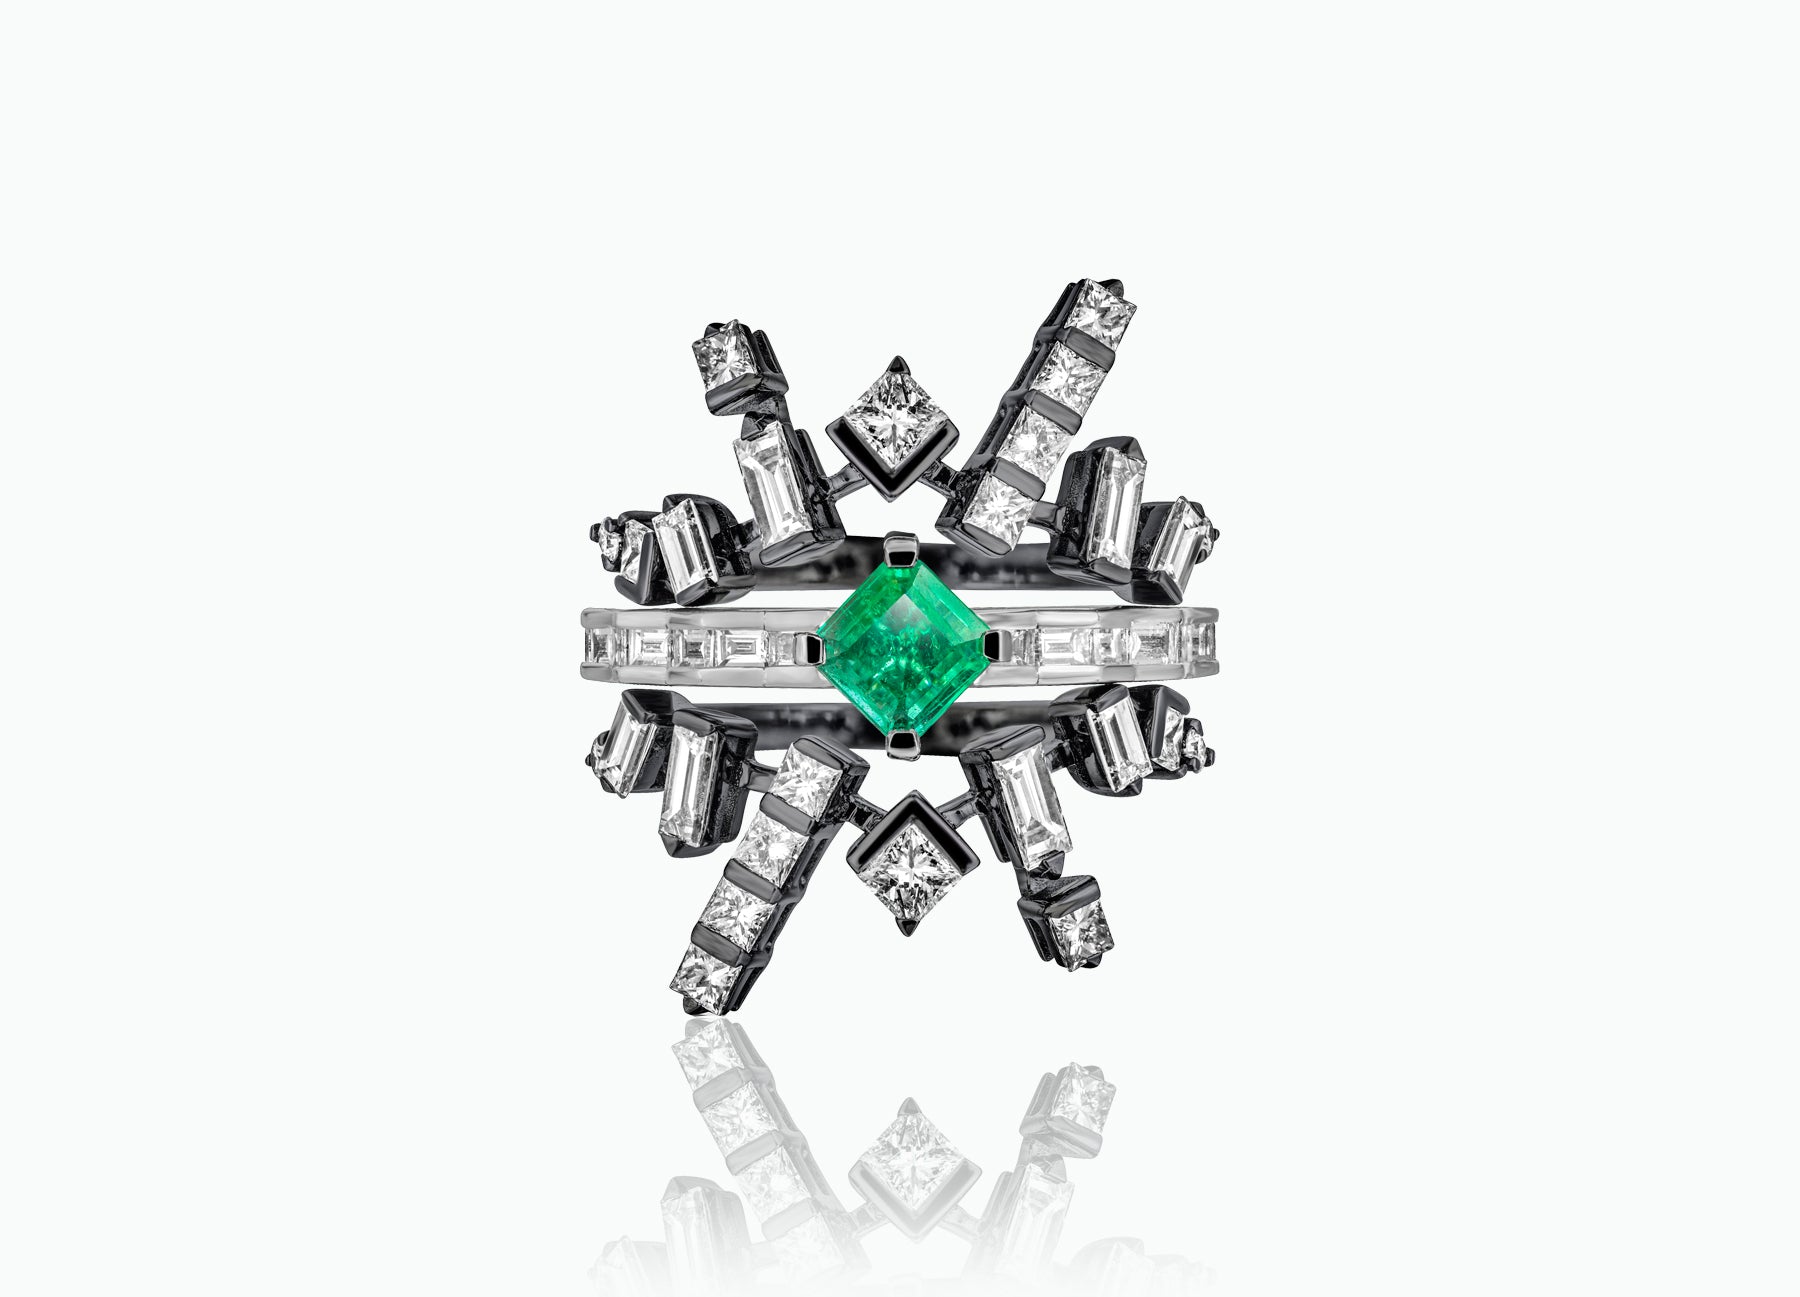 Cosmic Art Ring alternative bridal set by Tomasz Donocik a set of three rings with diamonds and an emerald centre stone Front view